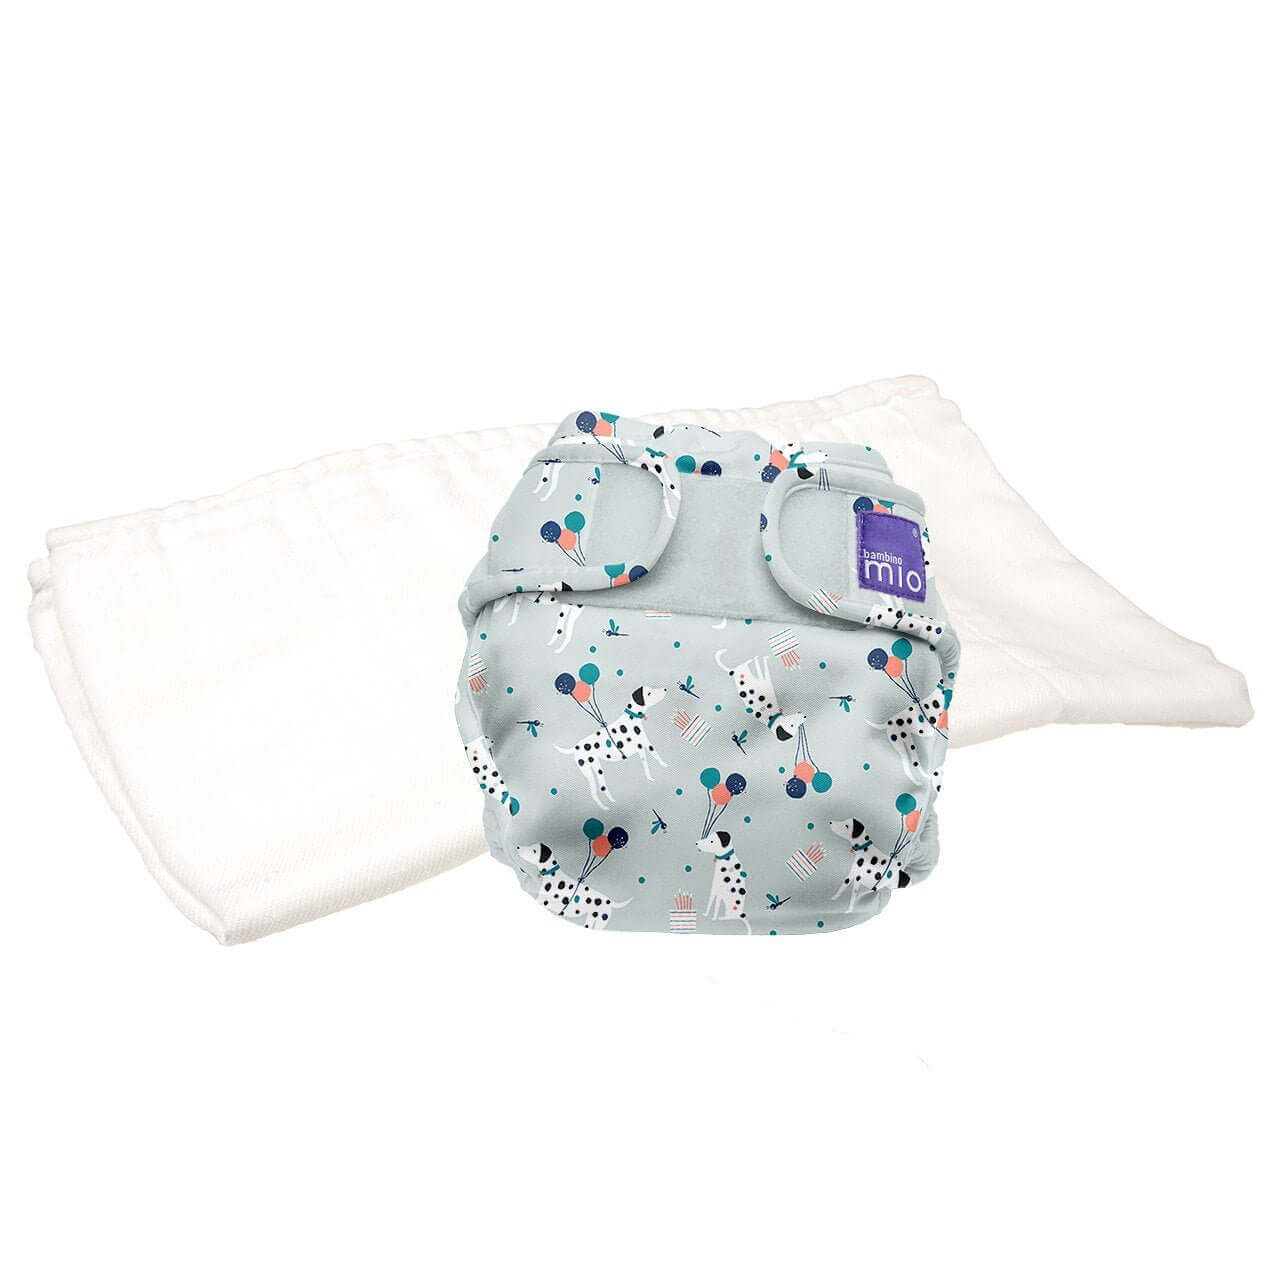 Bambino Mio Mioduo Two-Piece Nappy Size: Size 1 Colour: Puppy Party reusable nappies Earthlets